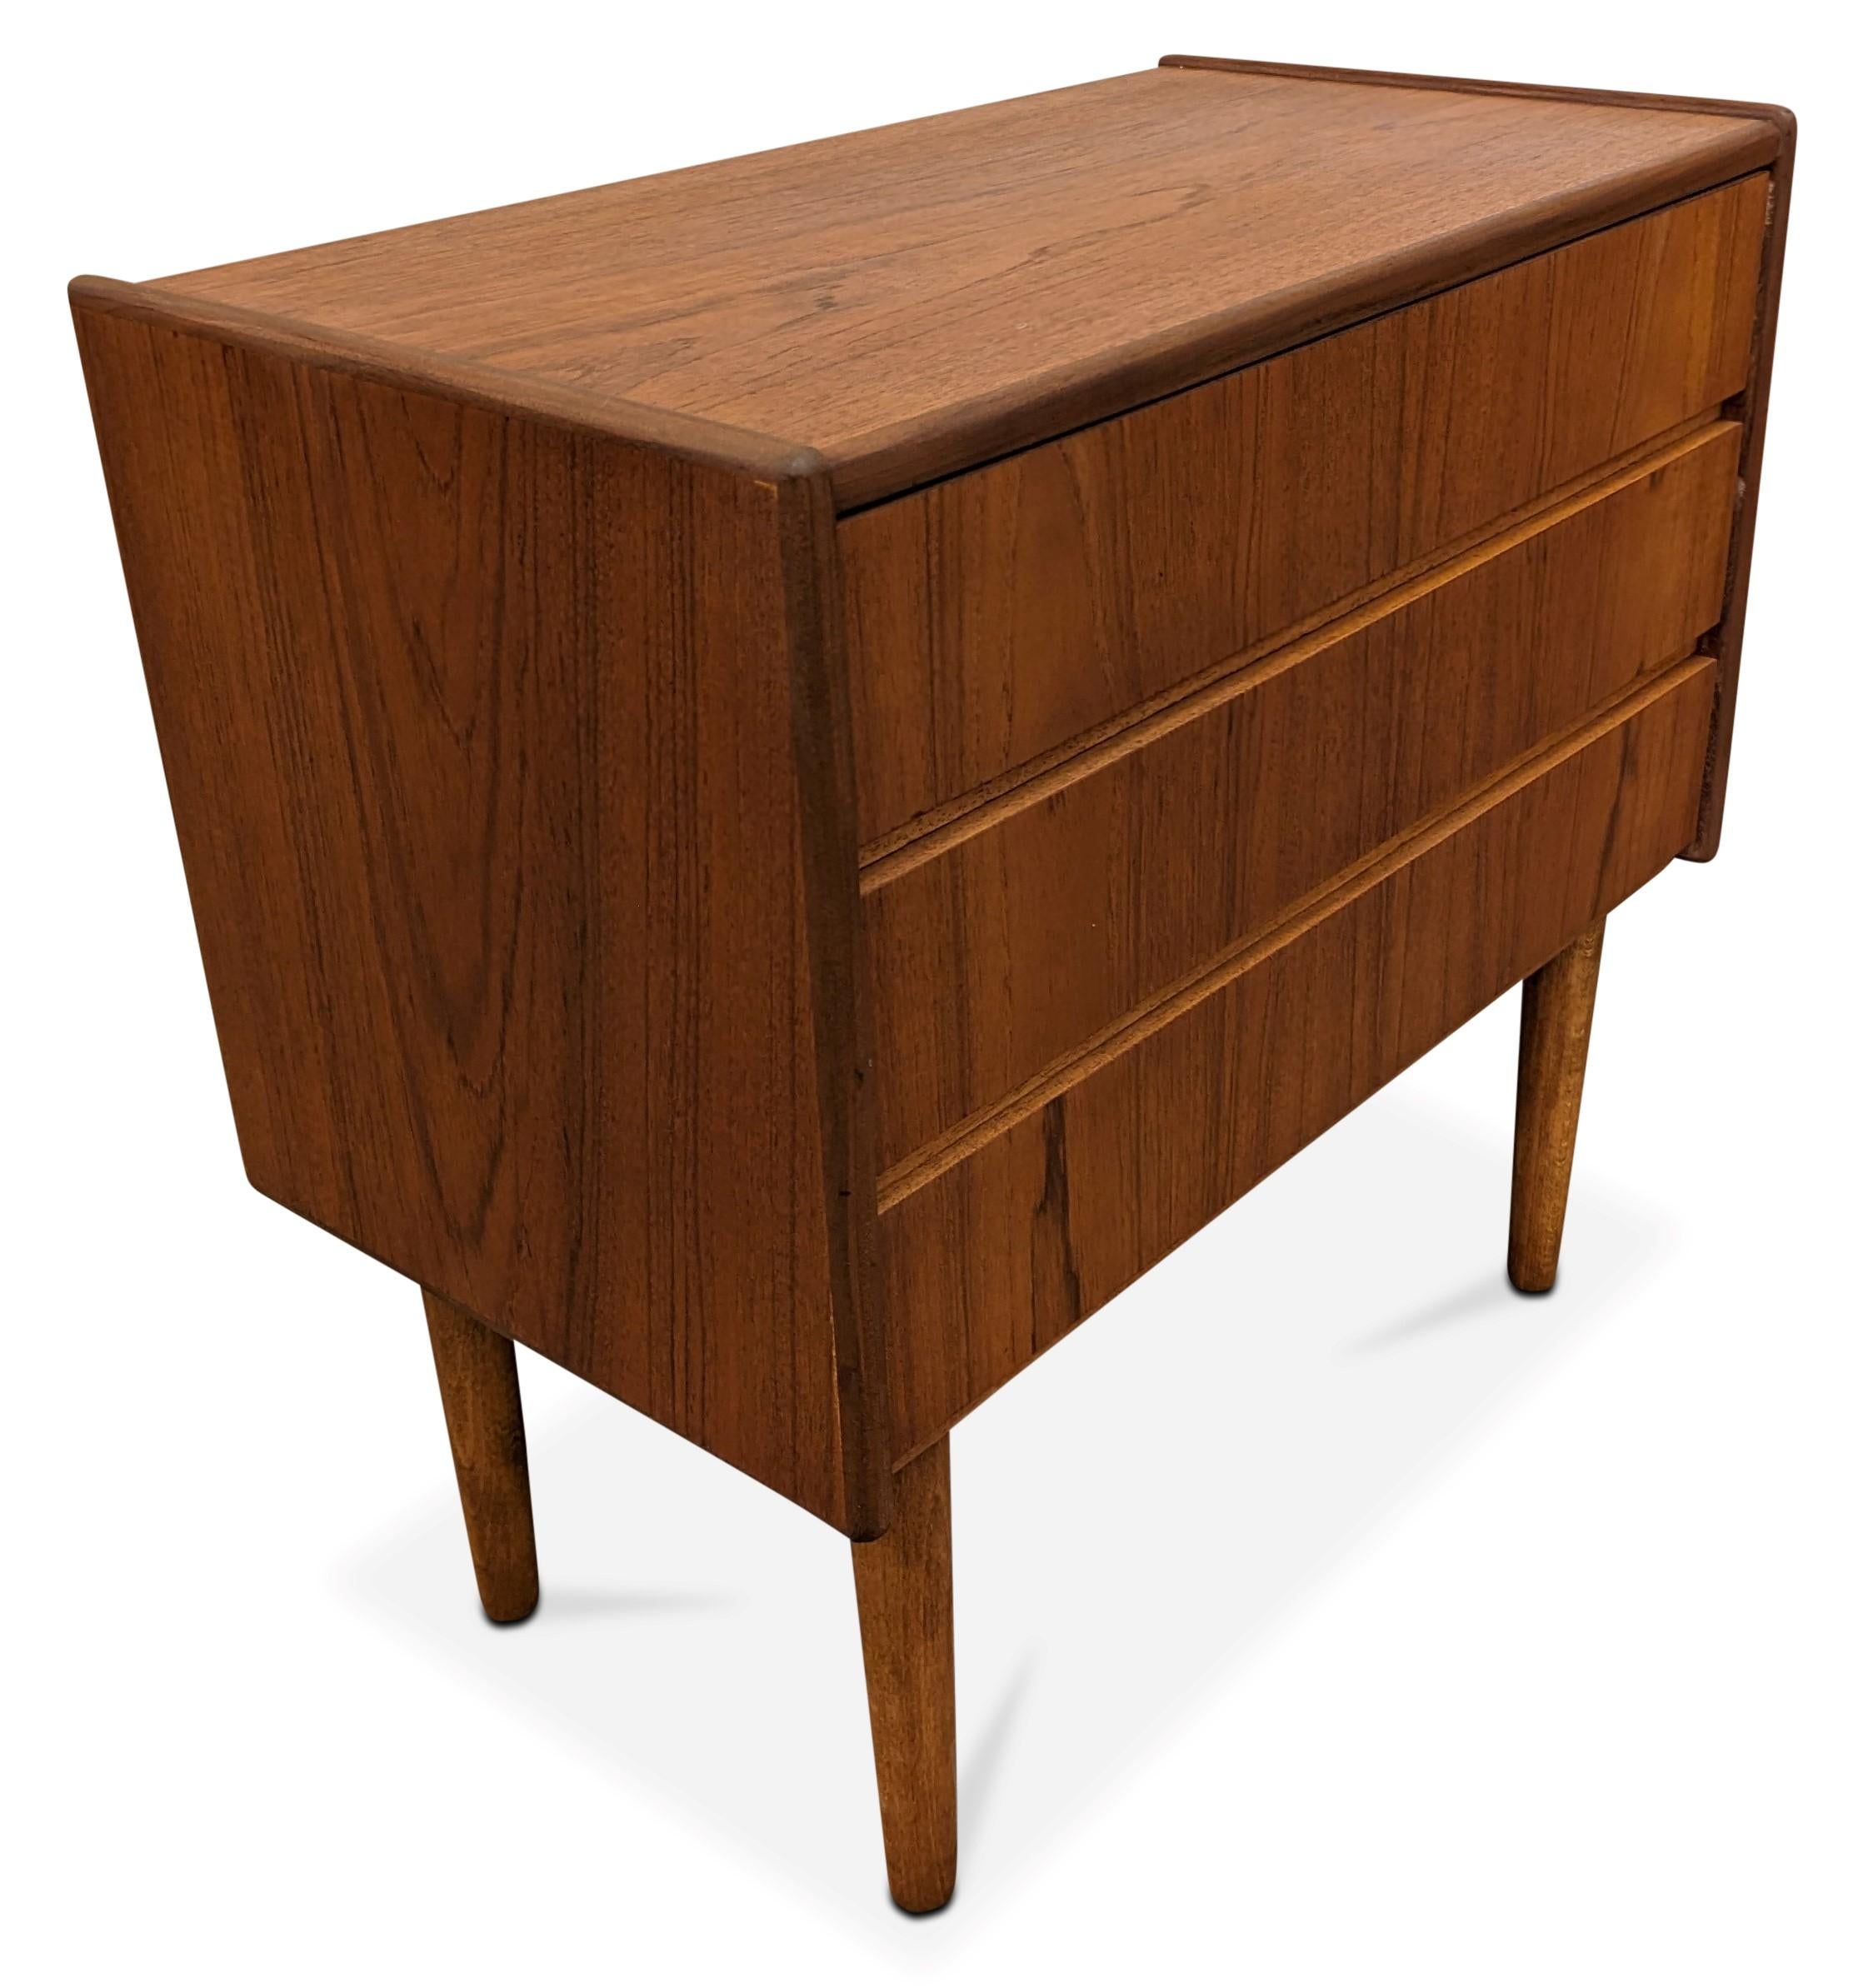 Vintage Danish Mid-Century Modern, made in the 1950s - Recently refurbished

These pieces are more than 65+ years old and some wear and tear can be expected, but we do everything we can to refurbish them with respect to the design.

There is a